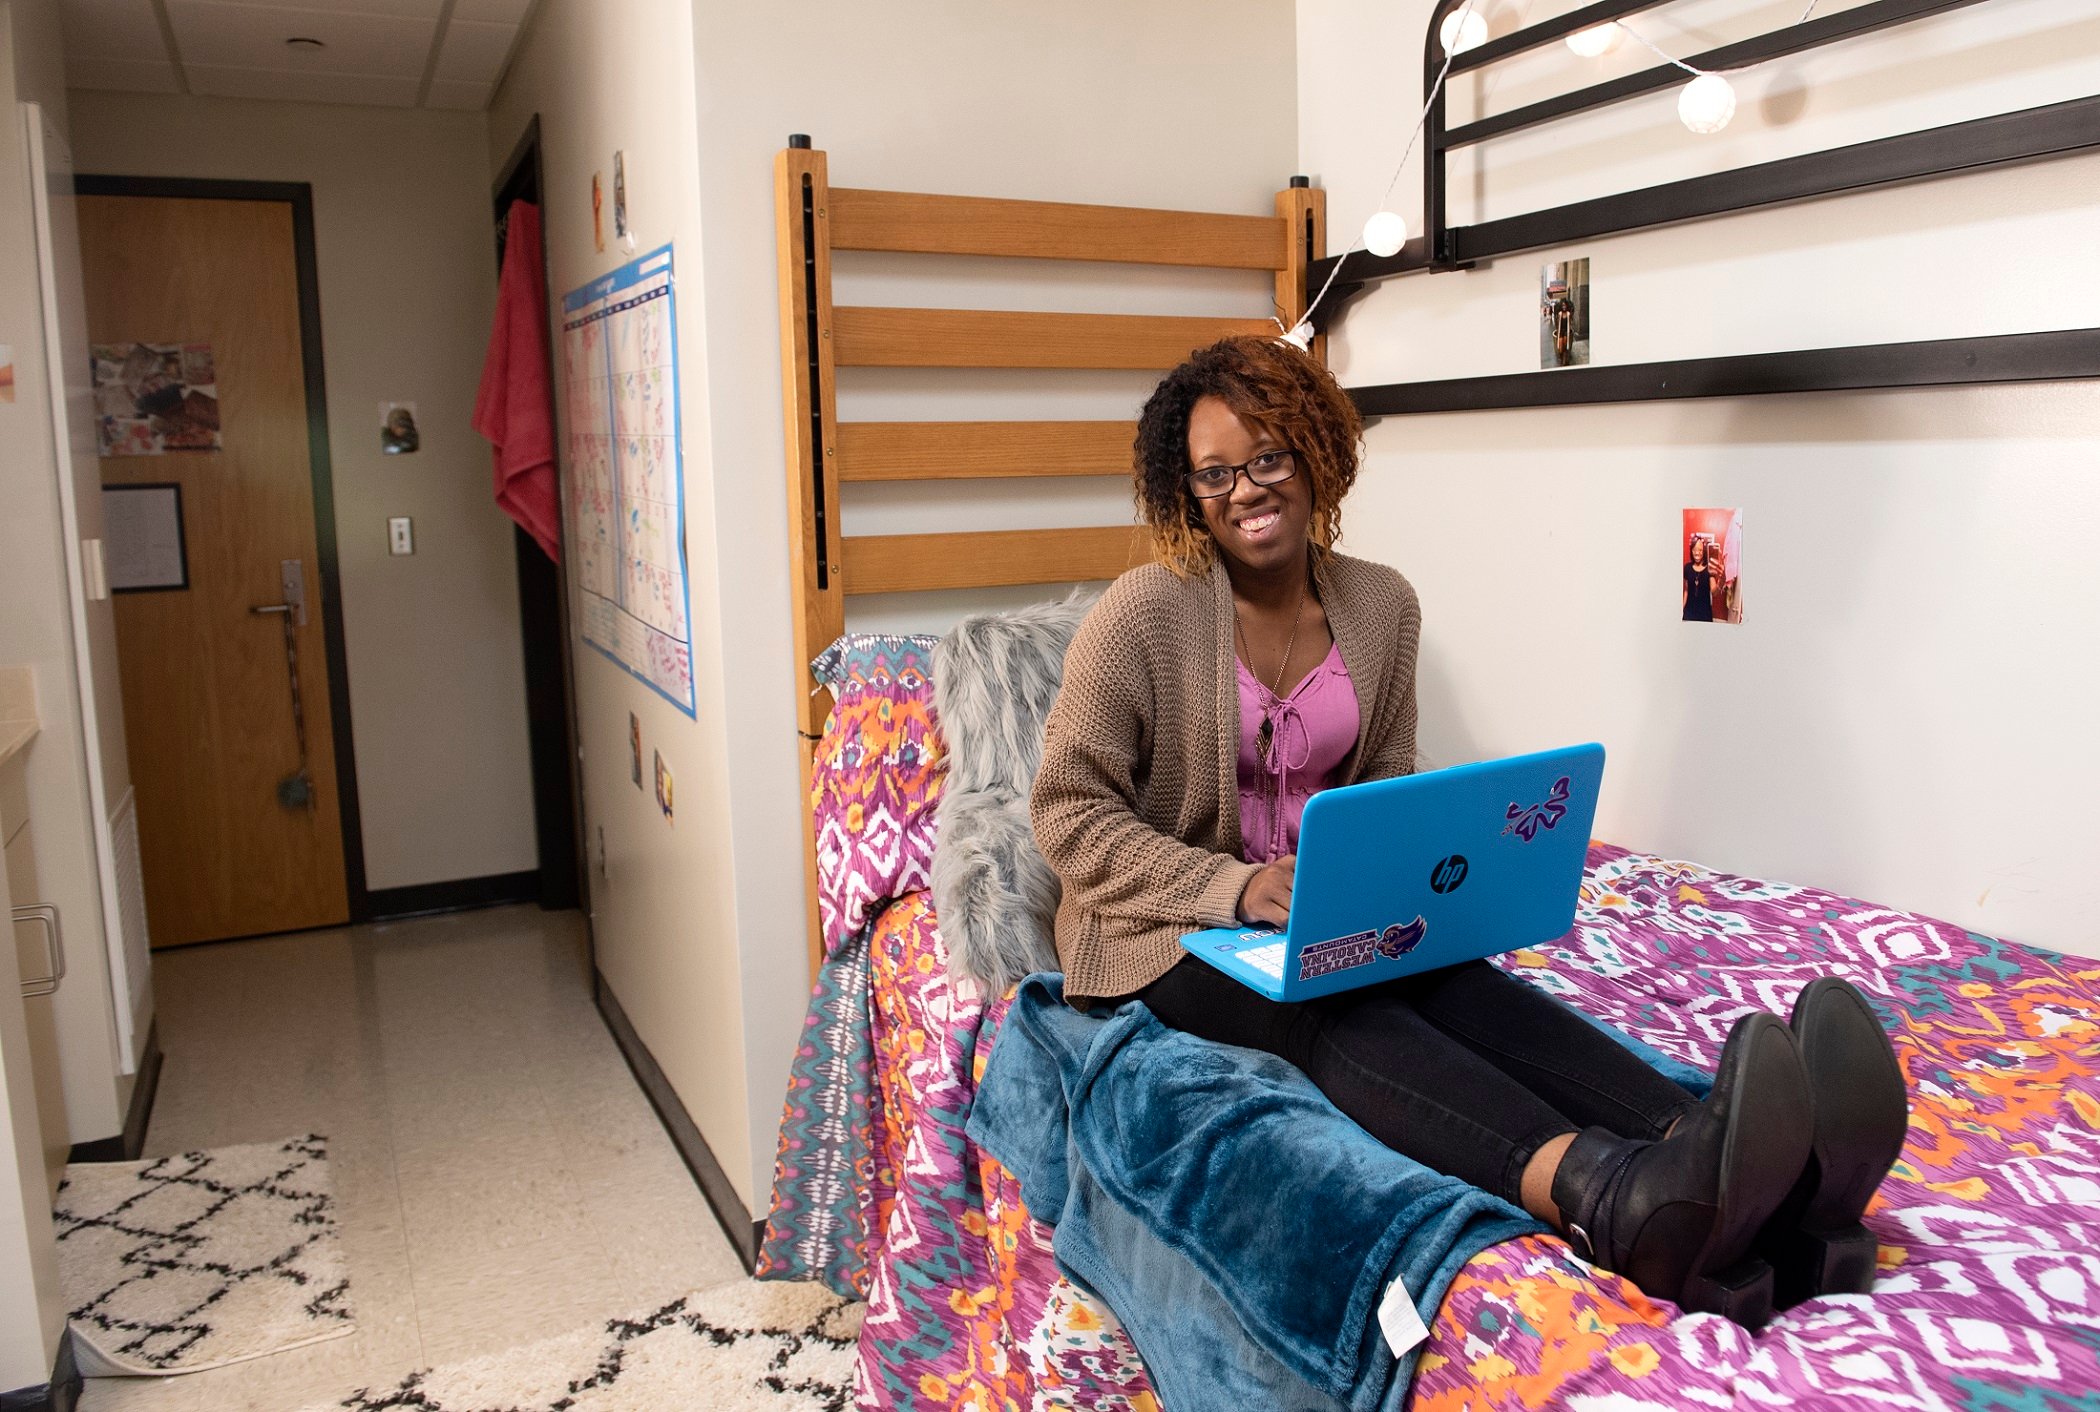 A young Black woman sits on a dorm room bed with a brighty colored duvet. She has a blue laptop computer on her lap.